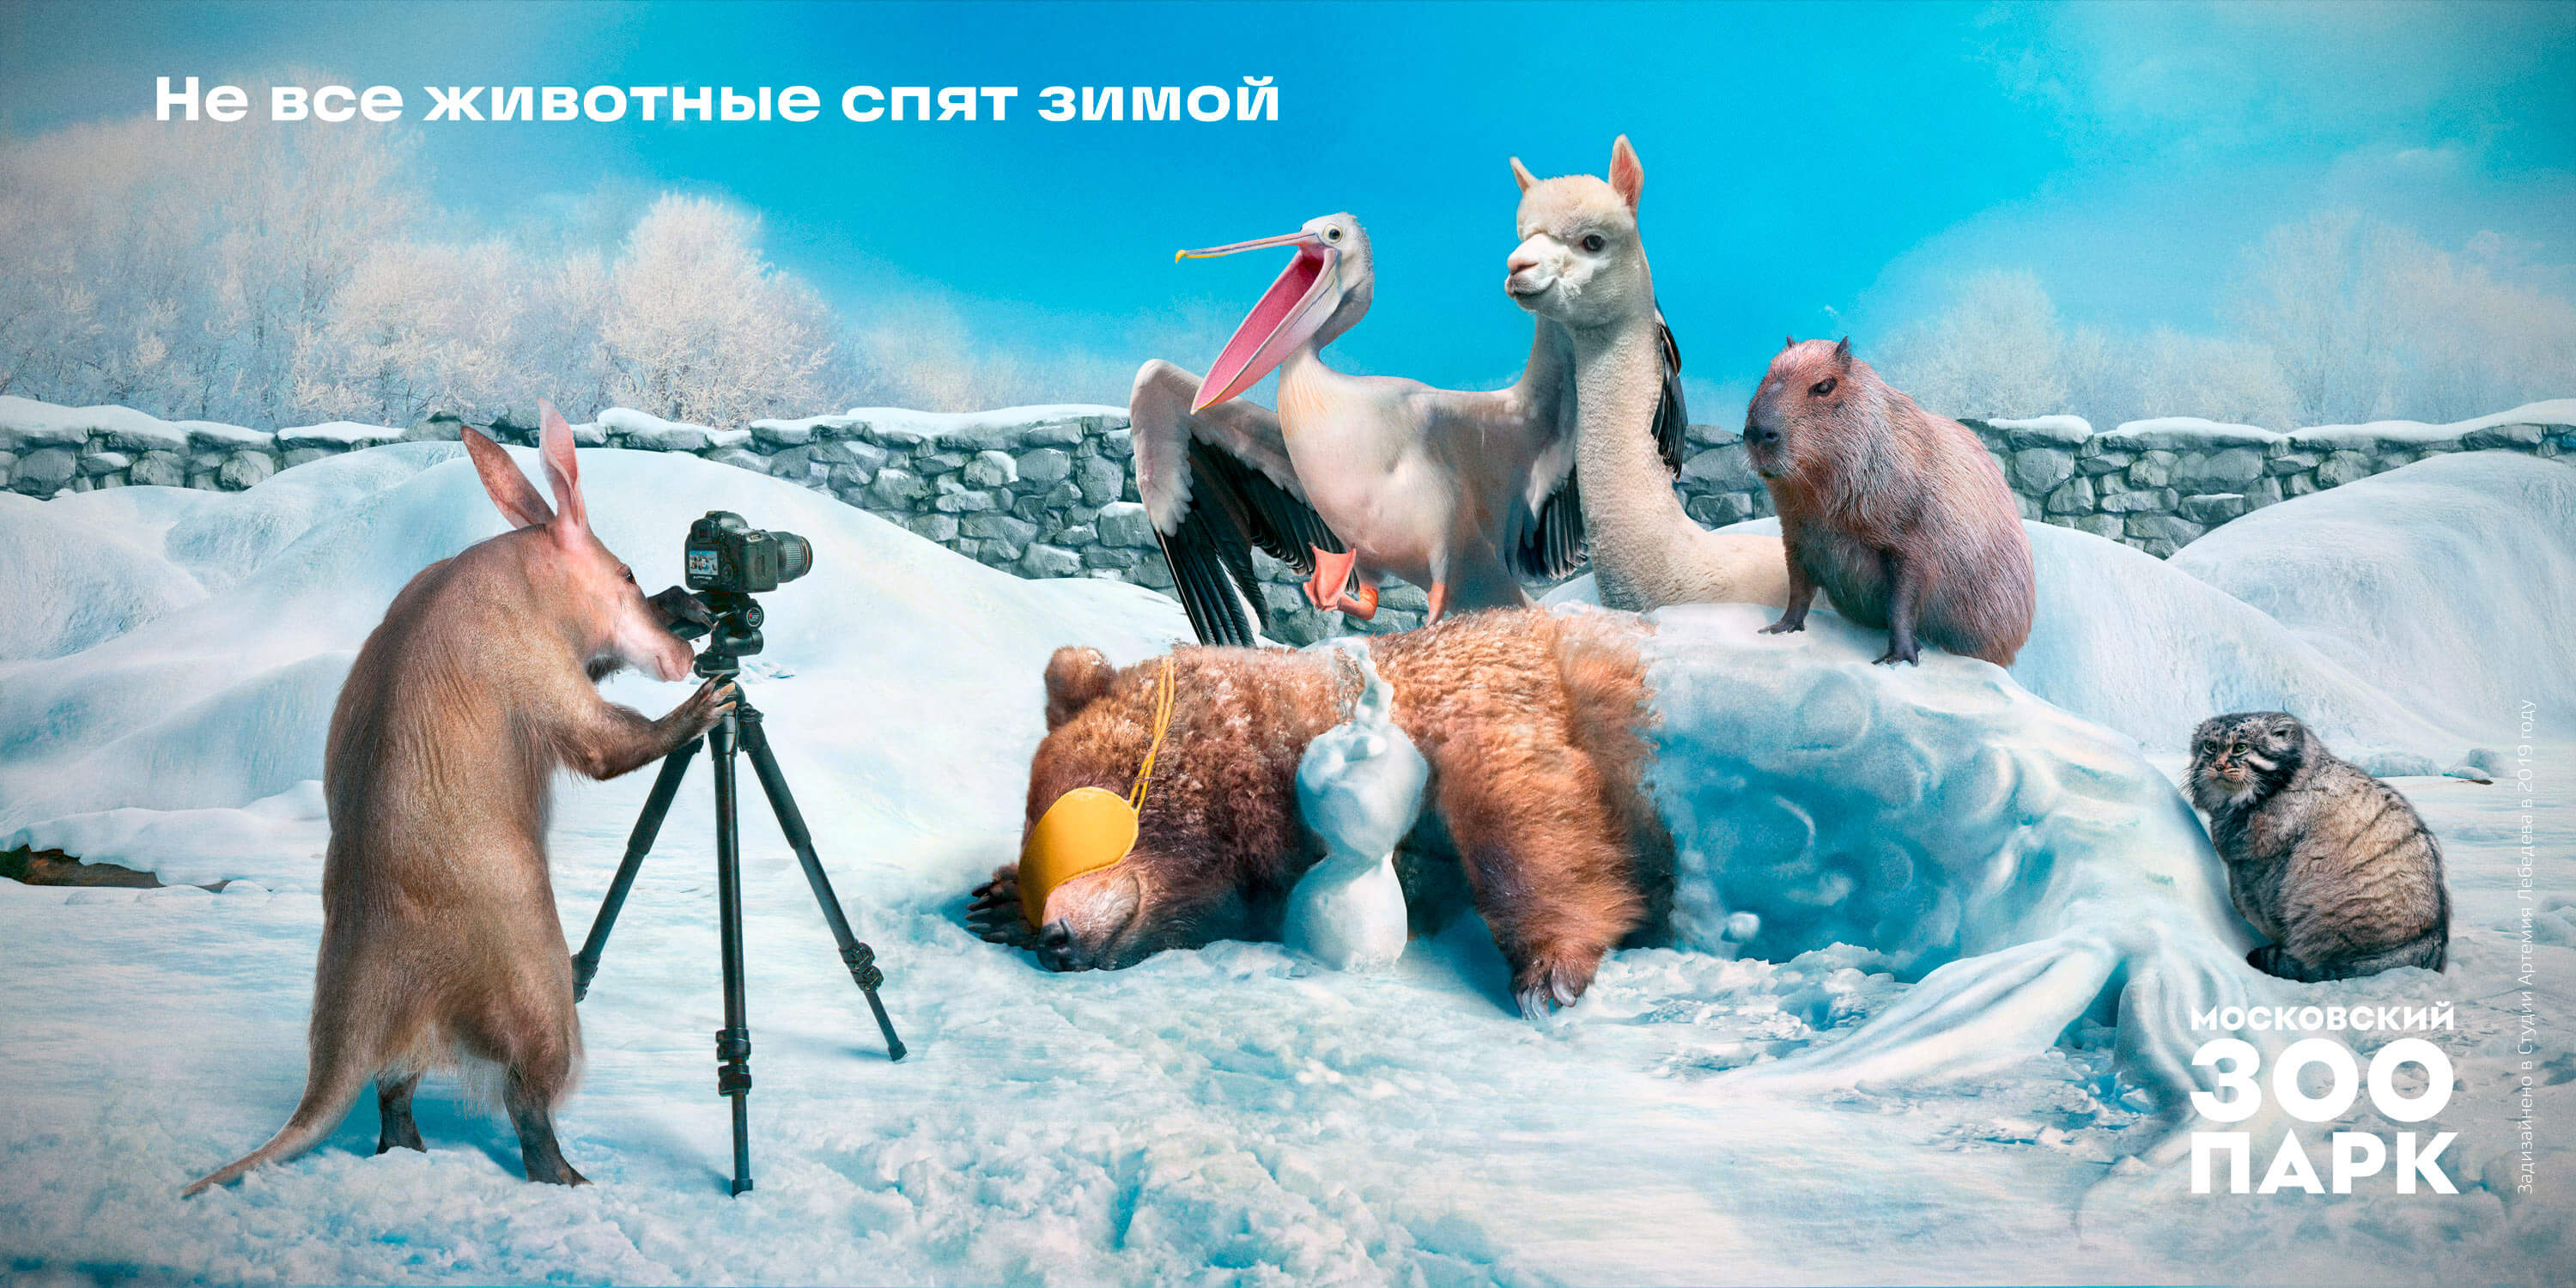 moscow zoo ad